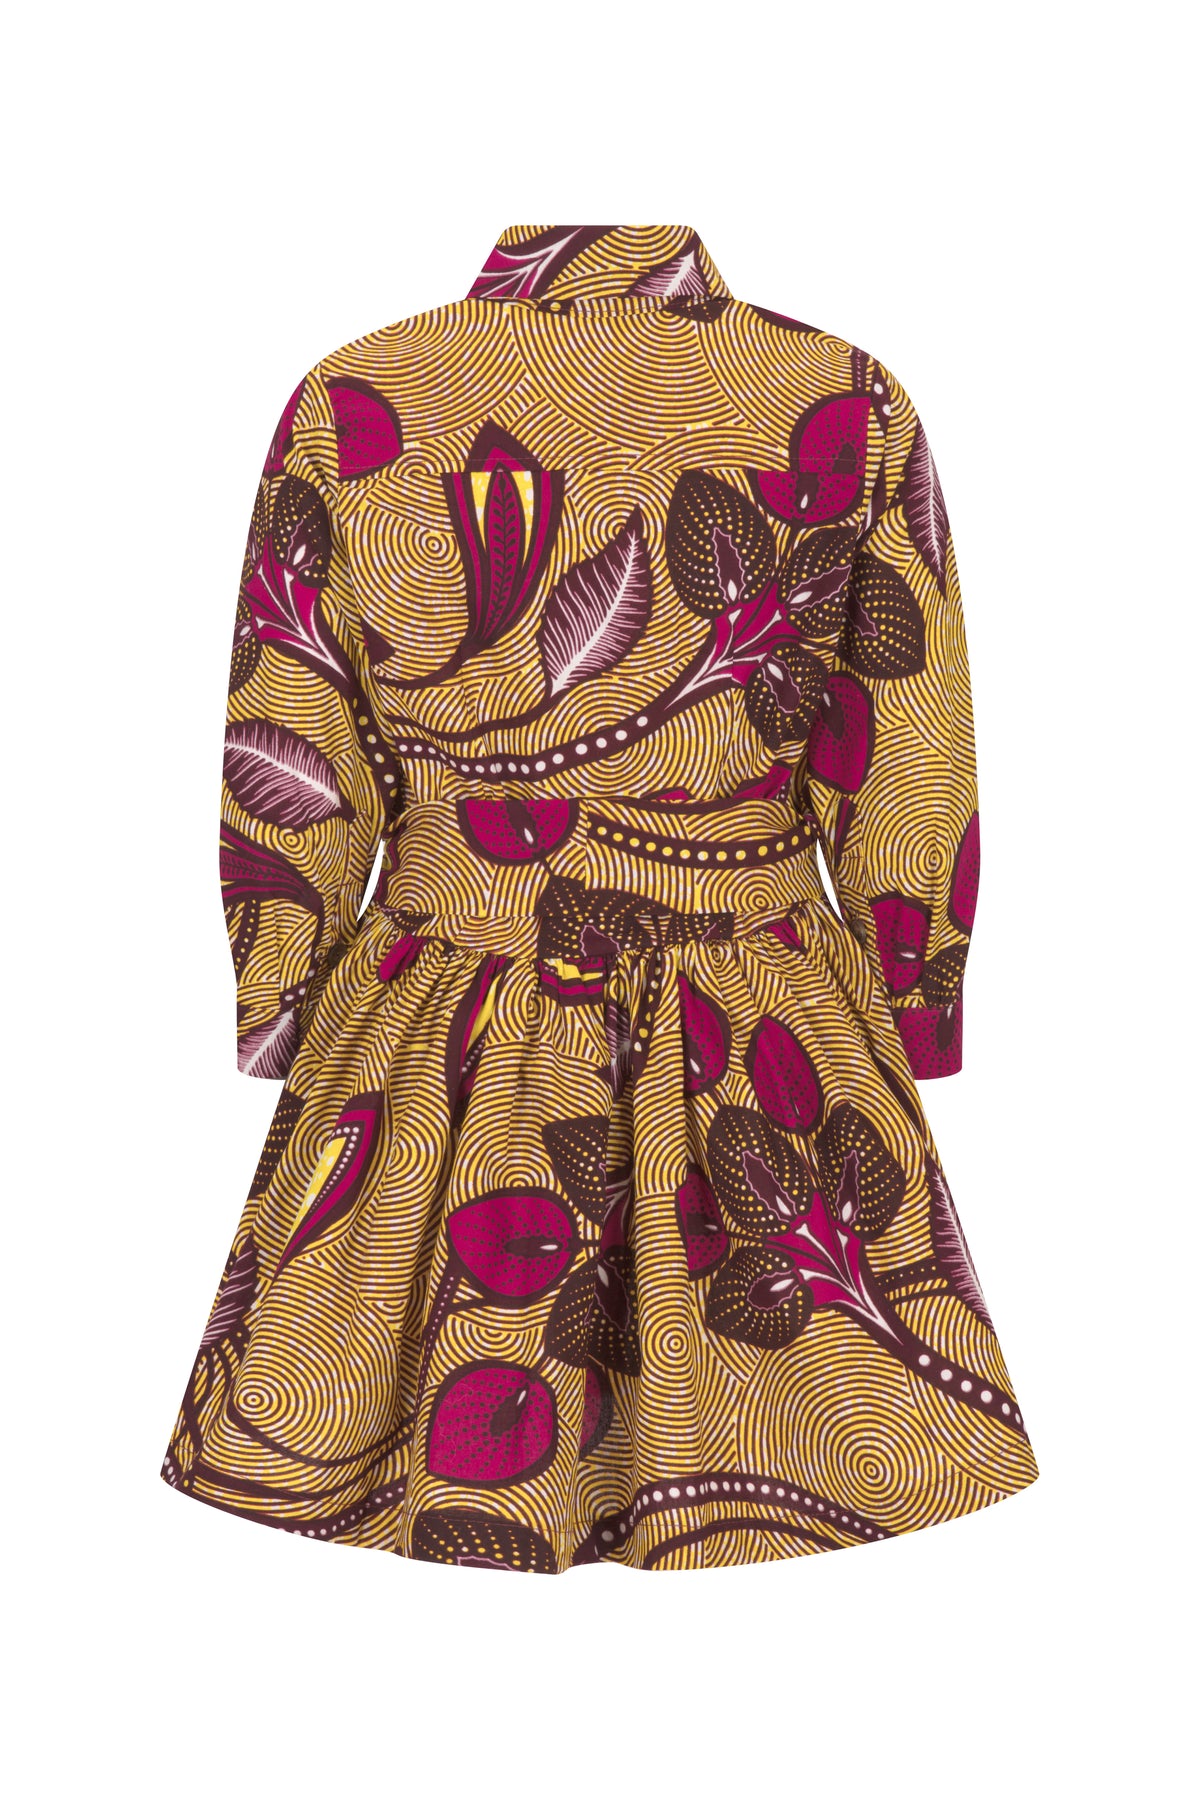 Girls African print dress- Wine Floral - OHEMA OHENE AFRICAN INSPIRED FASHION